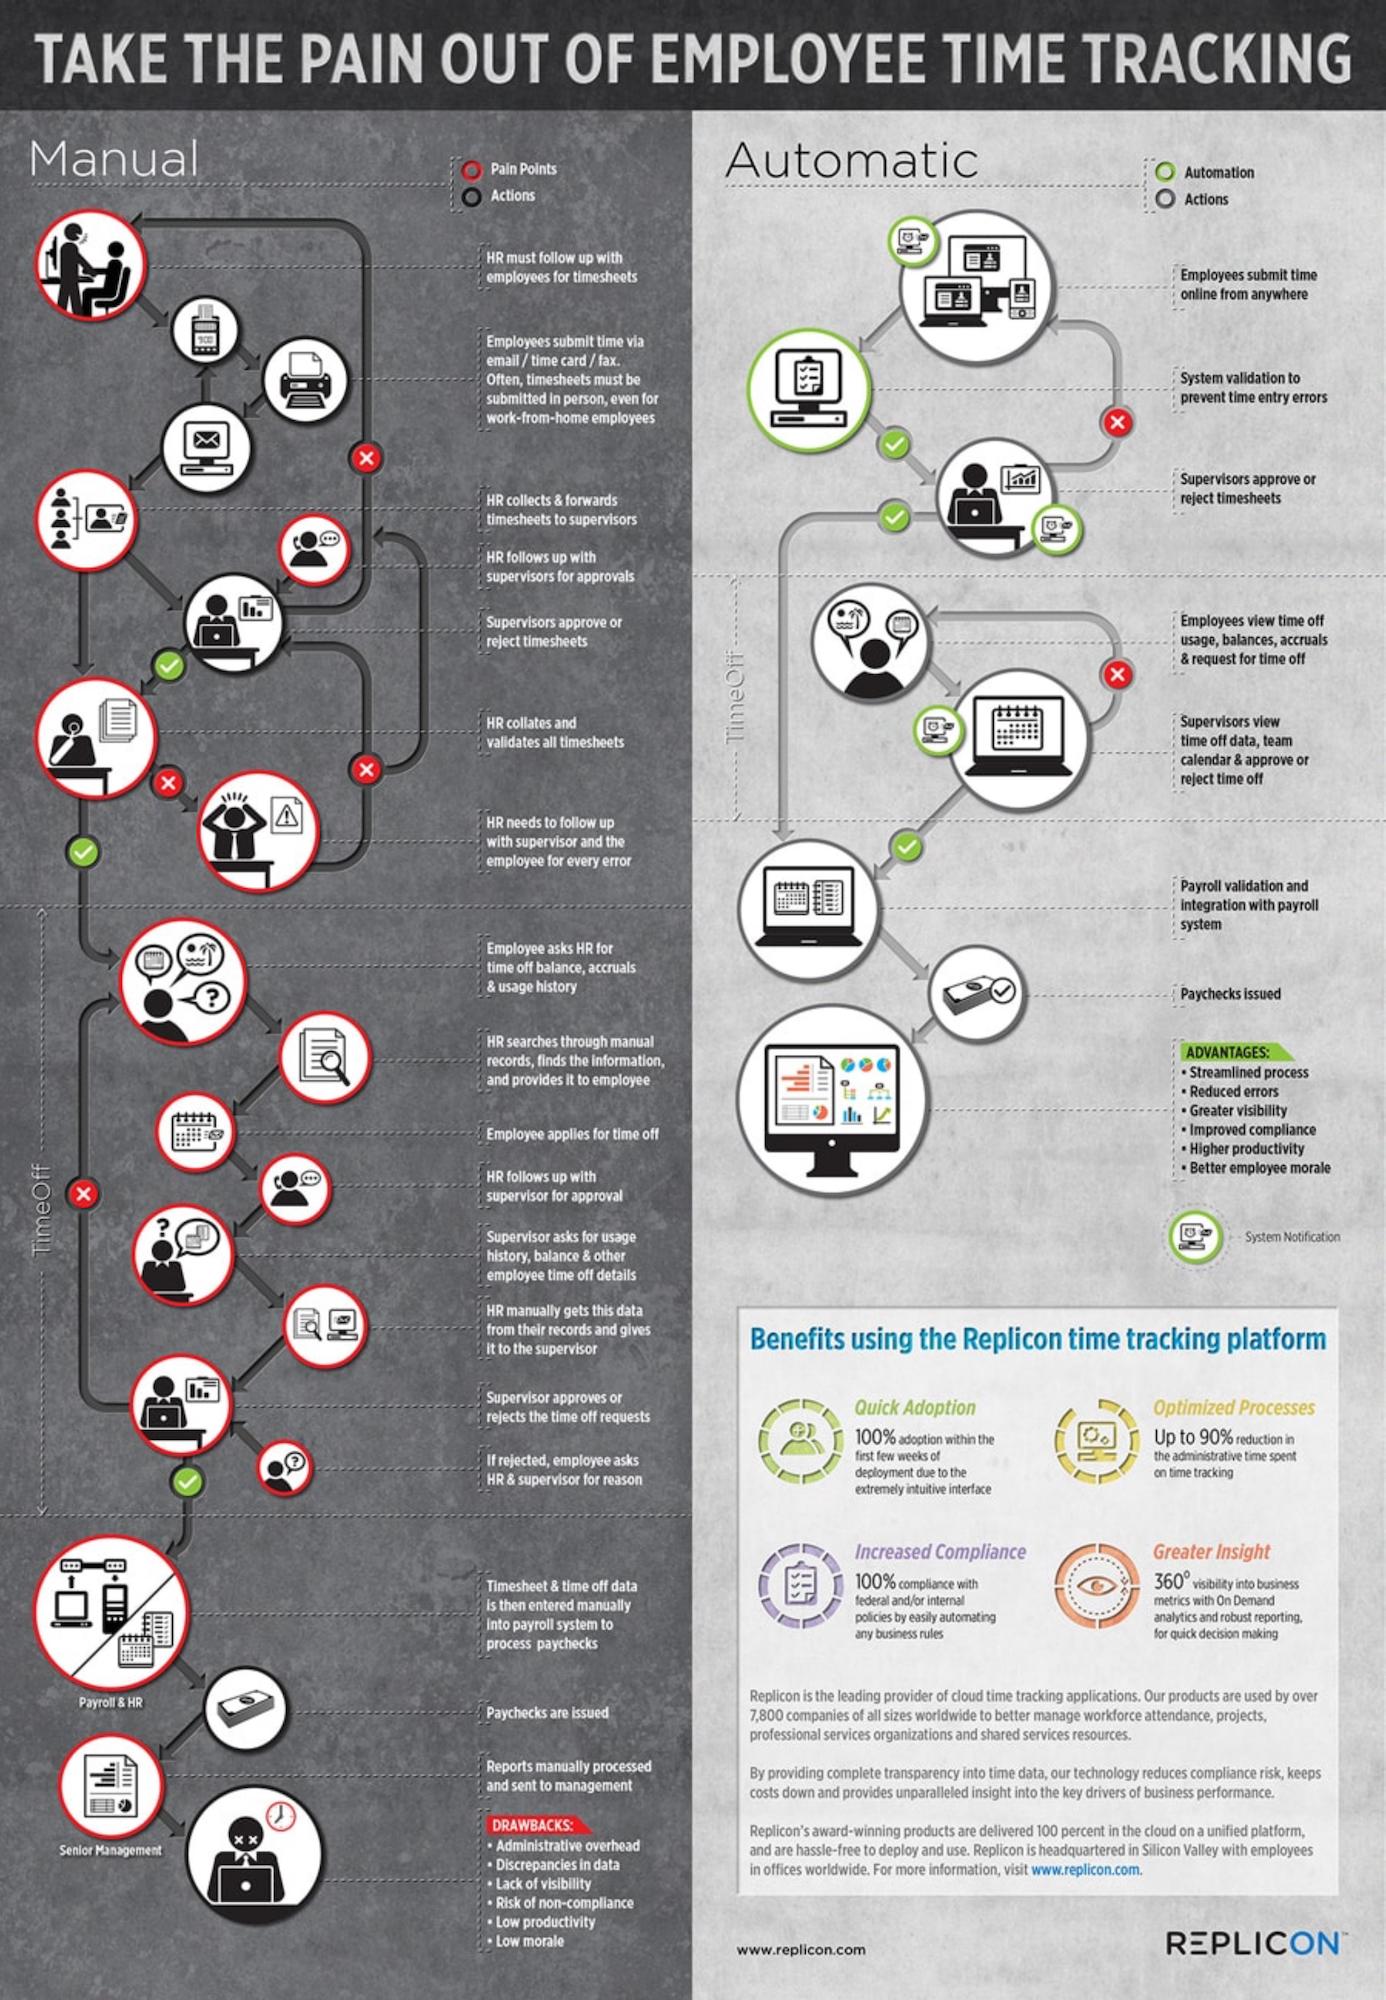 manual vs automatic time tracking infographic